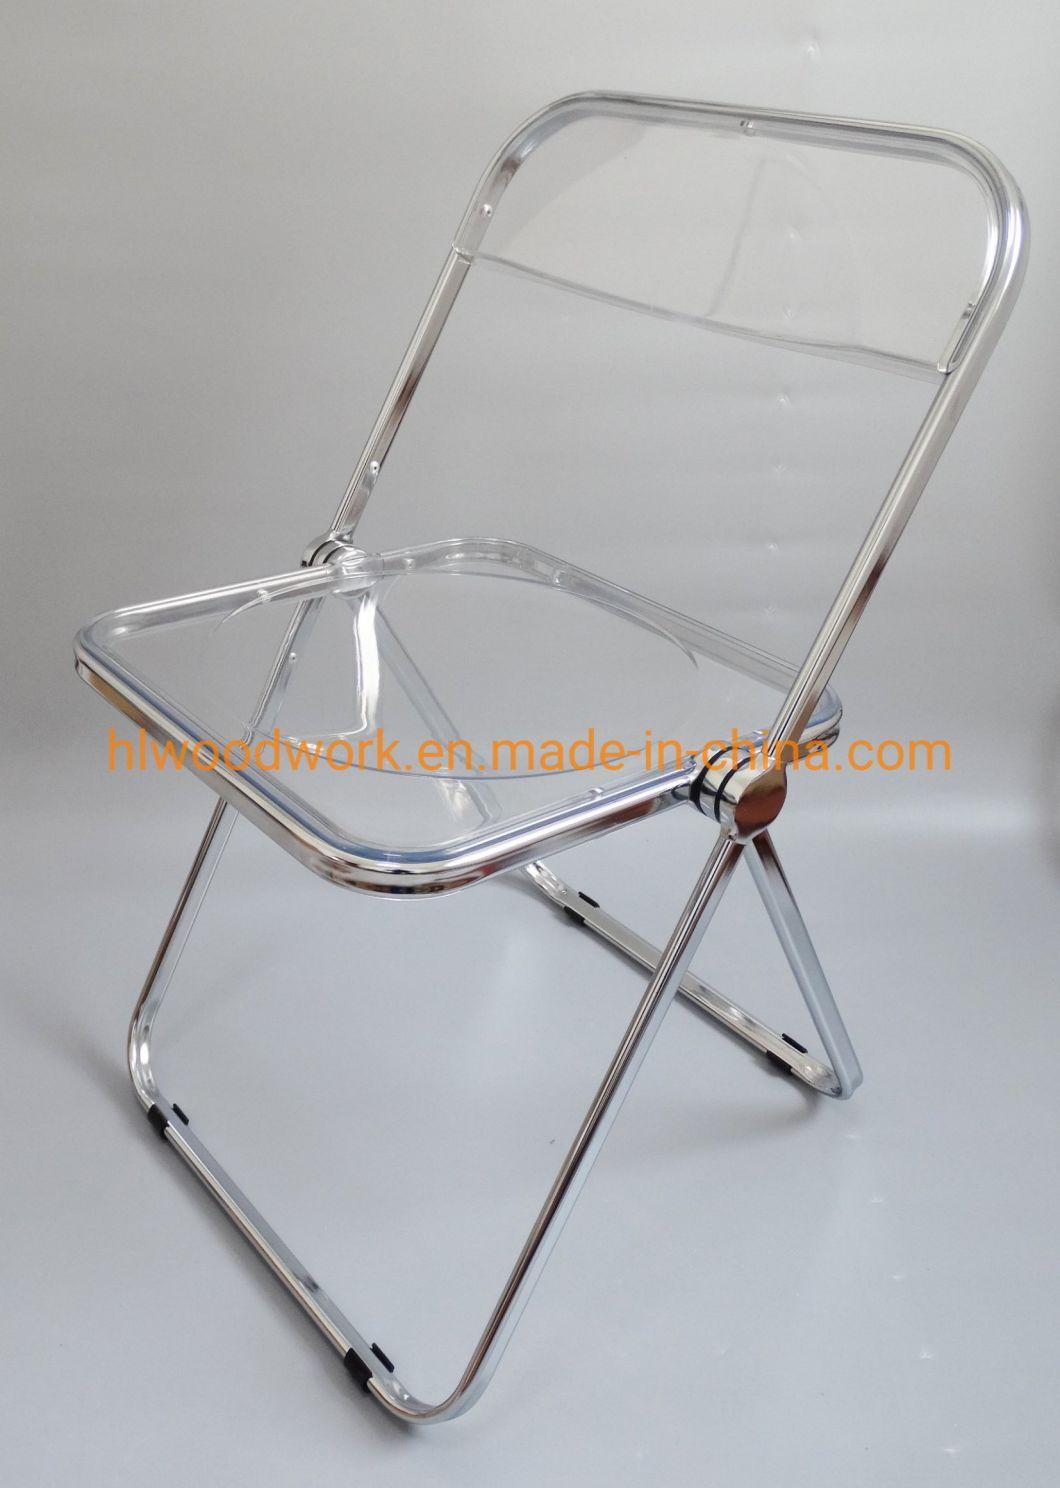 Modern Transparent Brown Folding Chair PC Plastic Study Room Chair Chrome Frame Office Bar Dining Leisure Banquet Wedding Meeting Chair Plastic Dining Chair